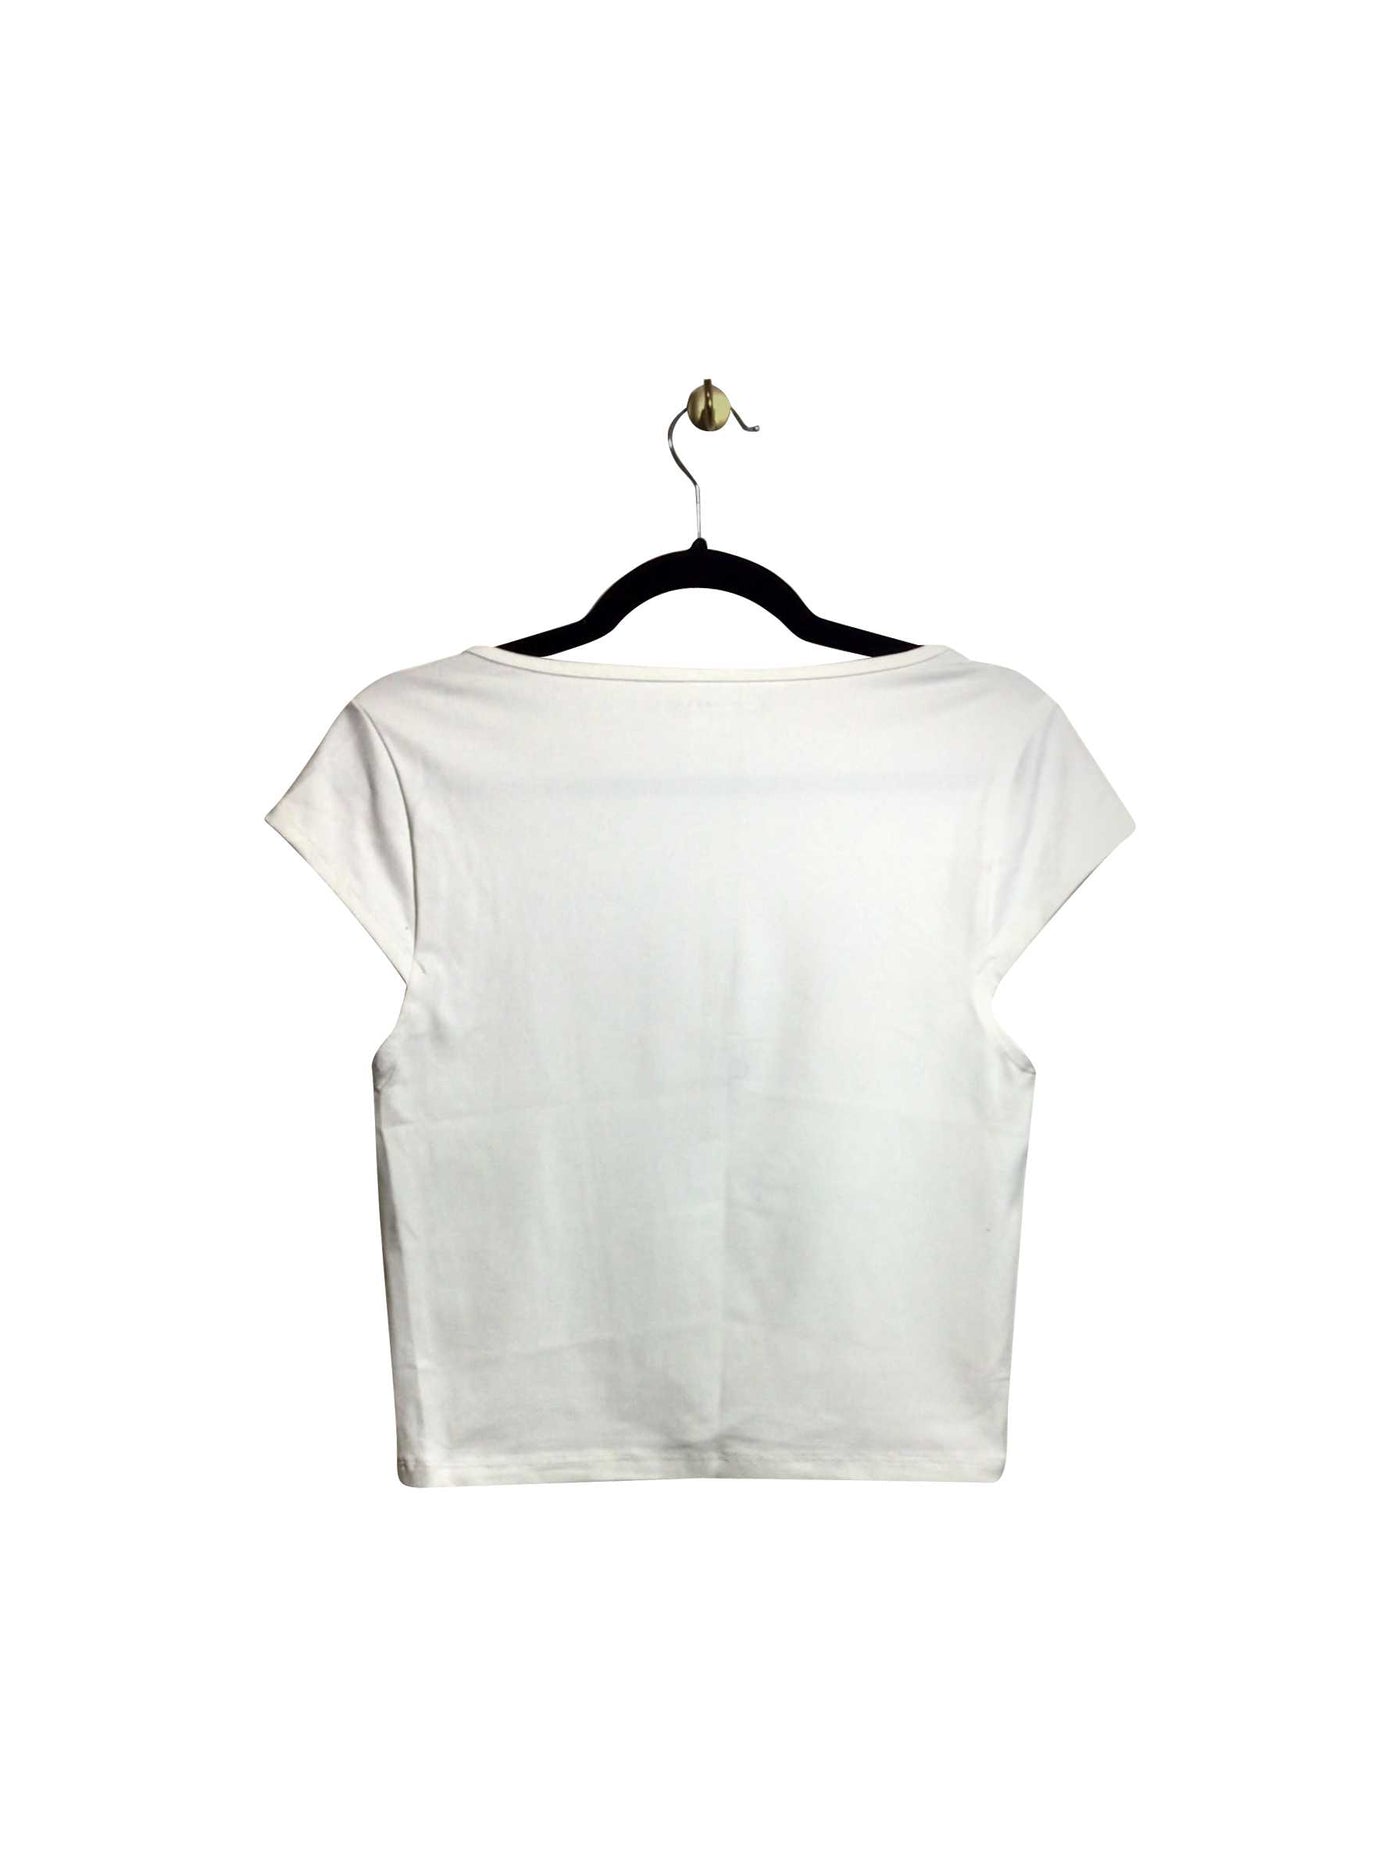 ABERCROMBIE & FITCH Regular fit Crop top in White - Size M | 13 $ KOOP